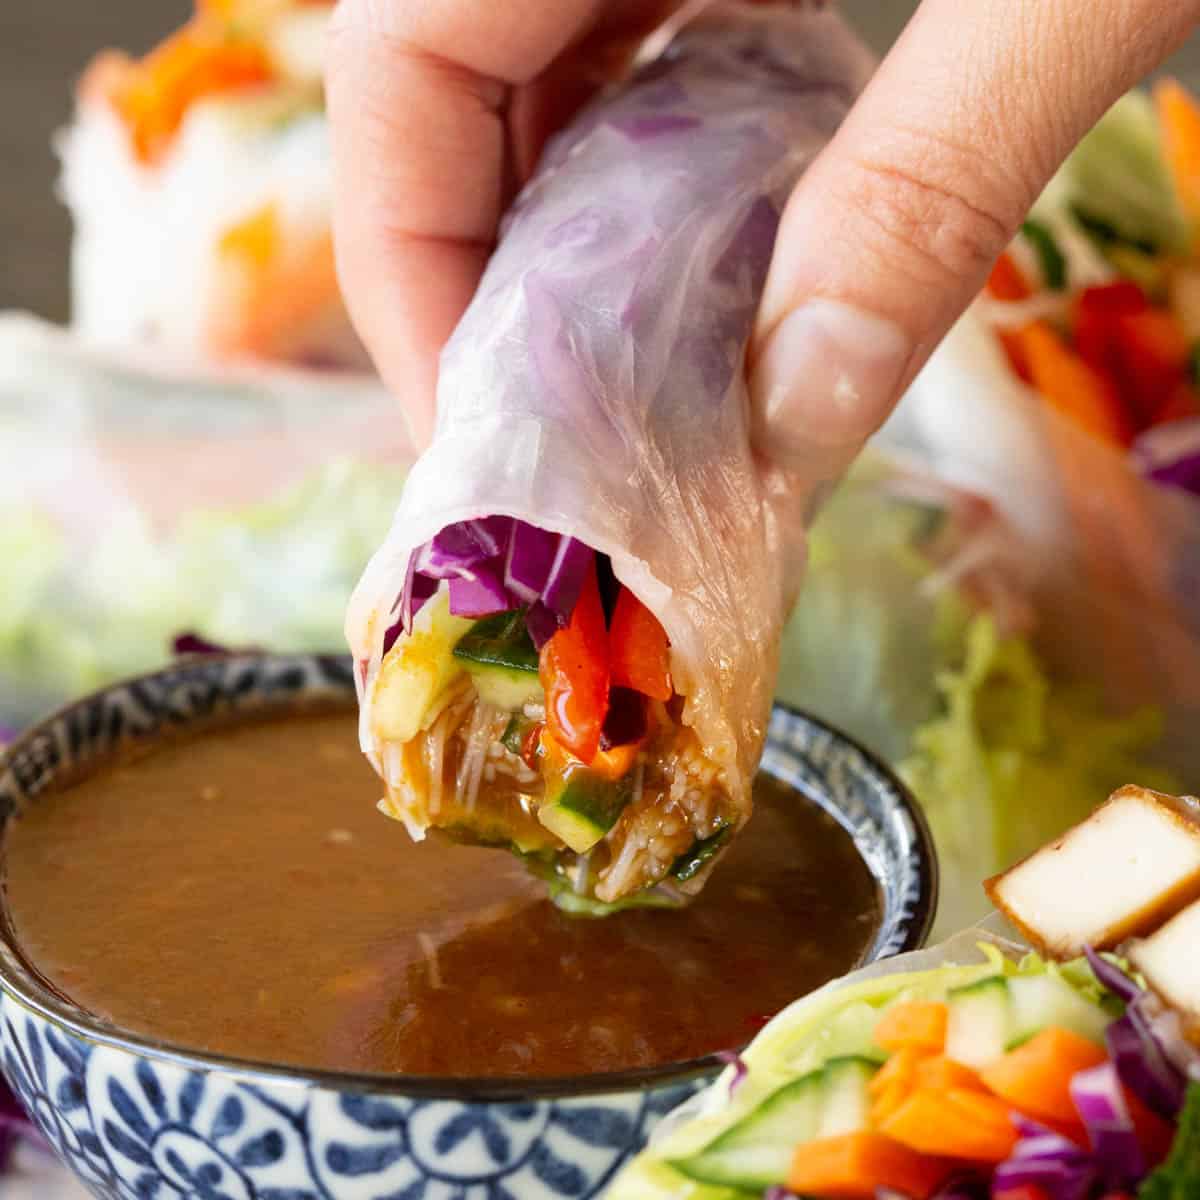 A hand dips a rice paper roll into tamarind sauce.